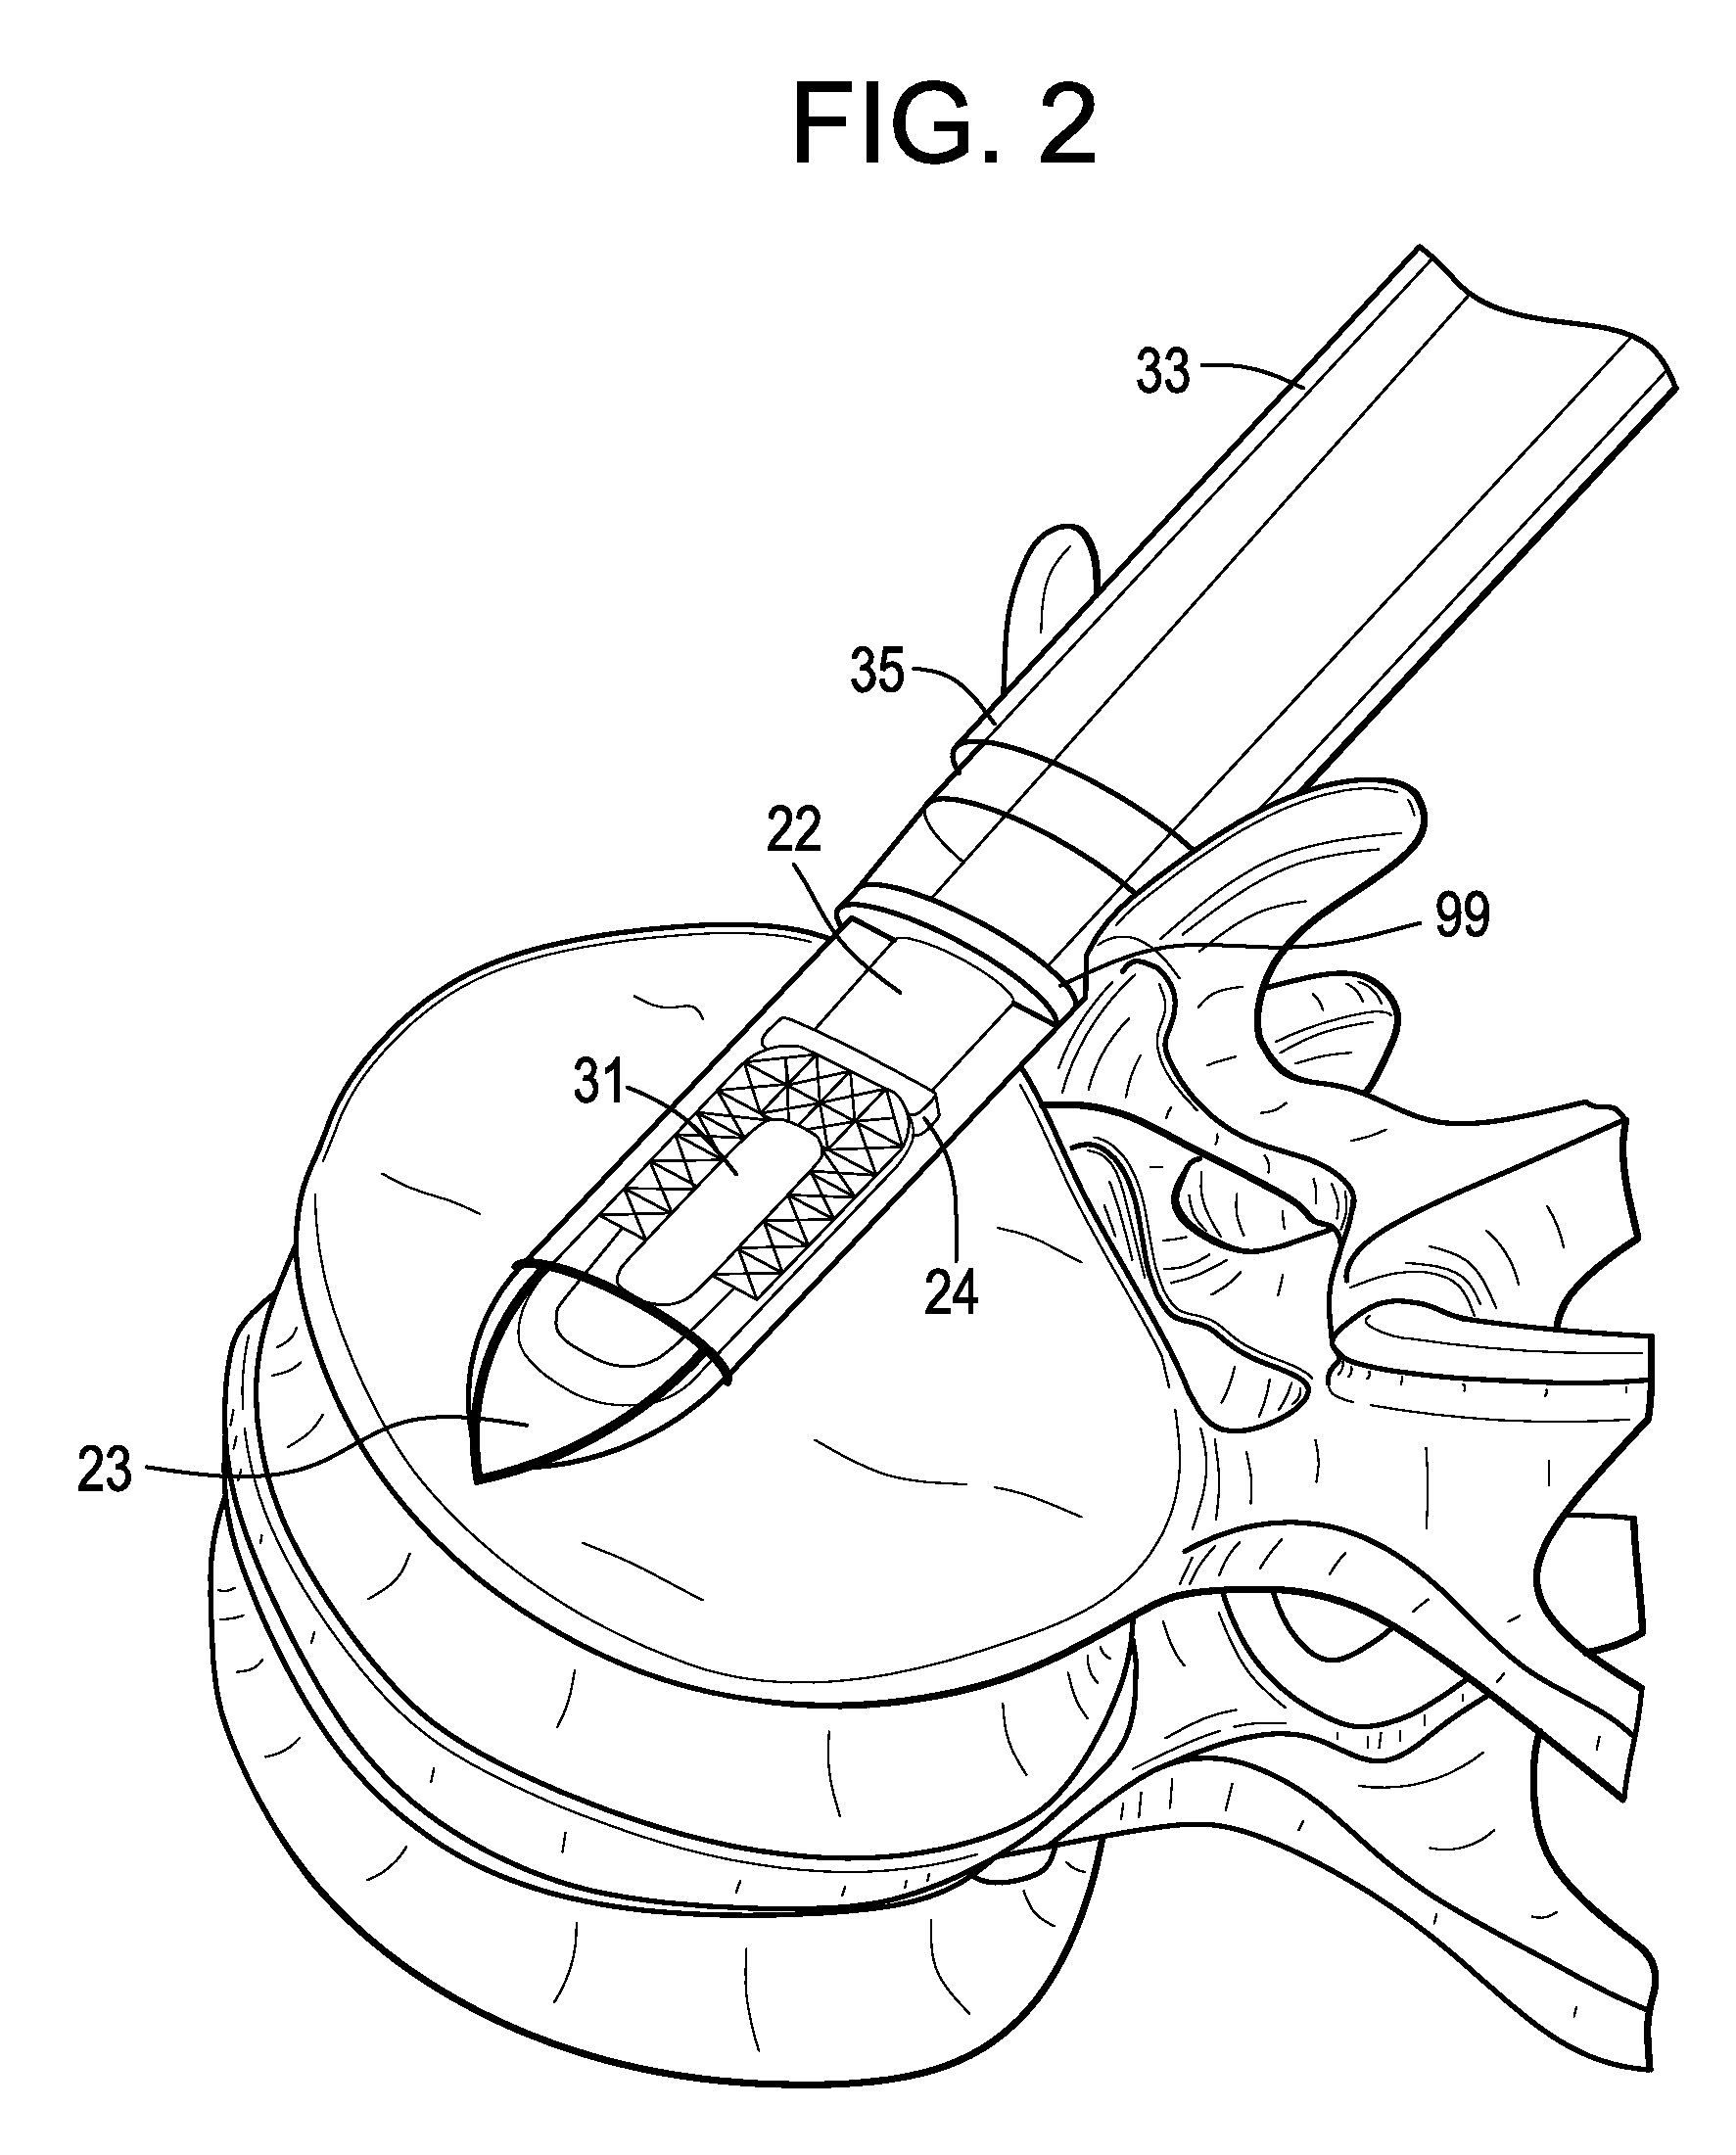 Enhanced cage insertion device